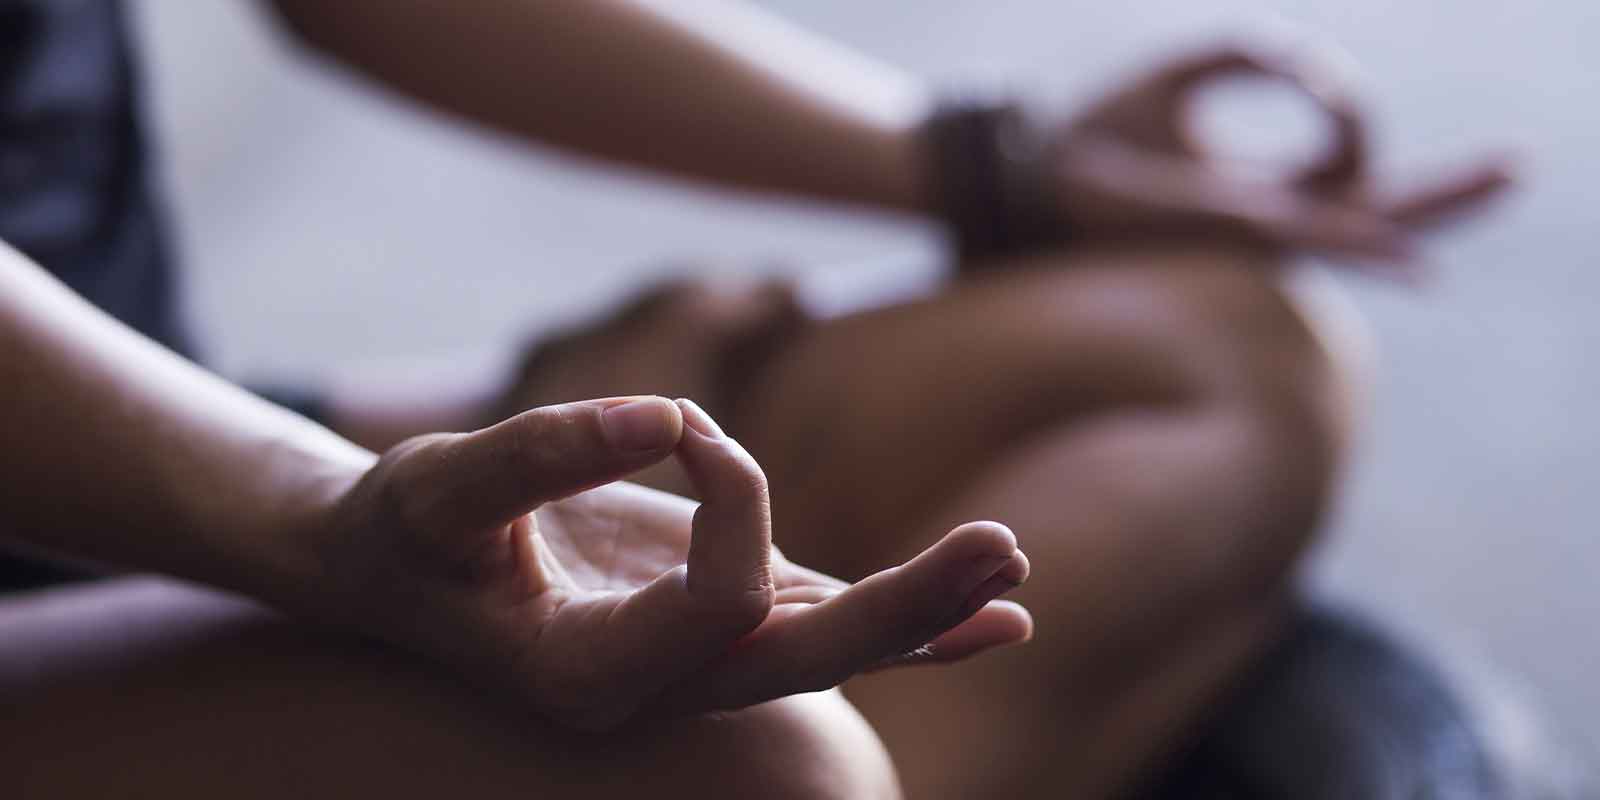 hands of someone doing a at home yoga sequence